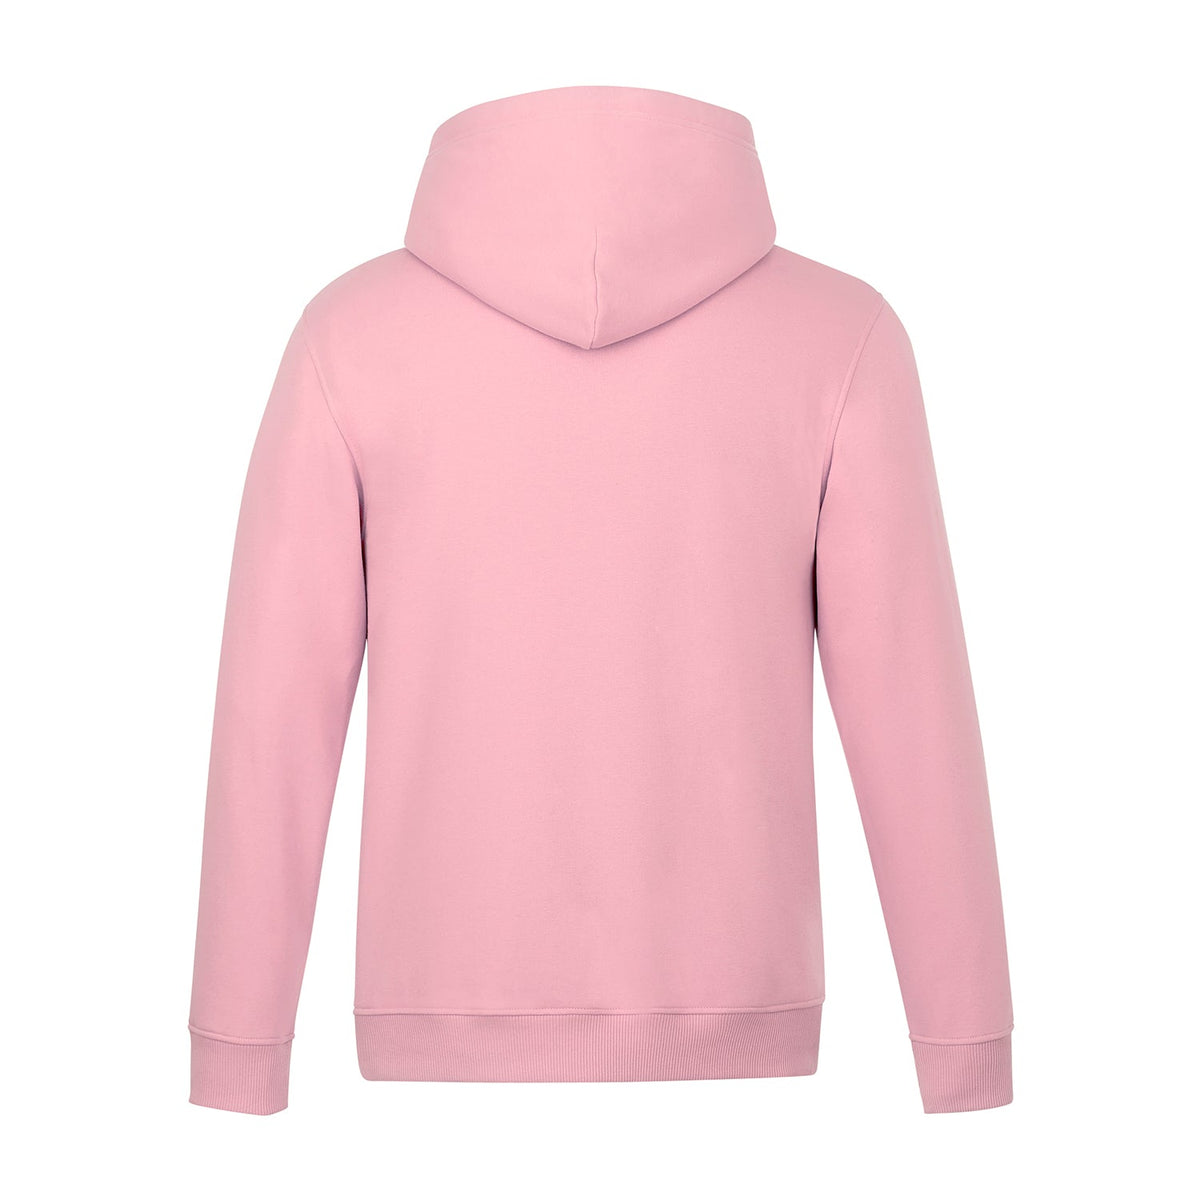 CSW 24/7 - Plus Sizes - Adult Pullover Hoodie